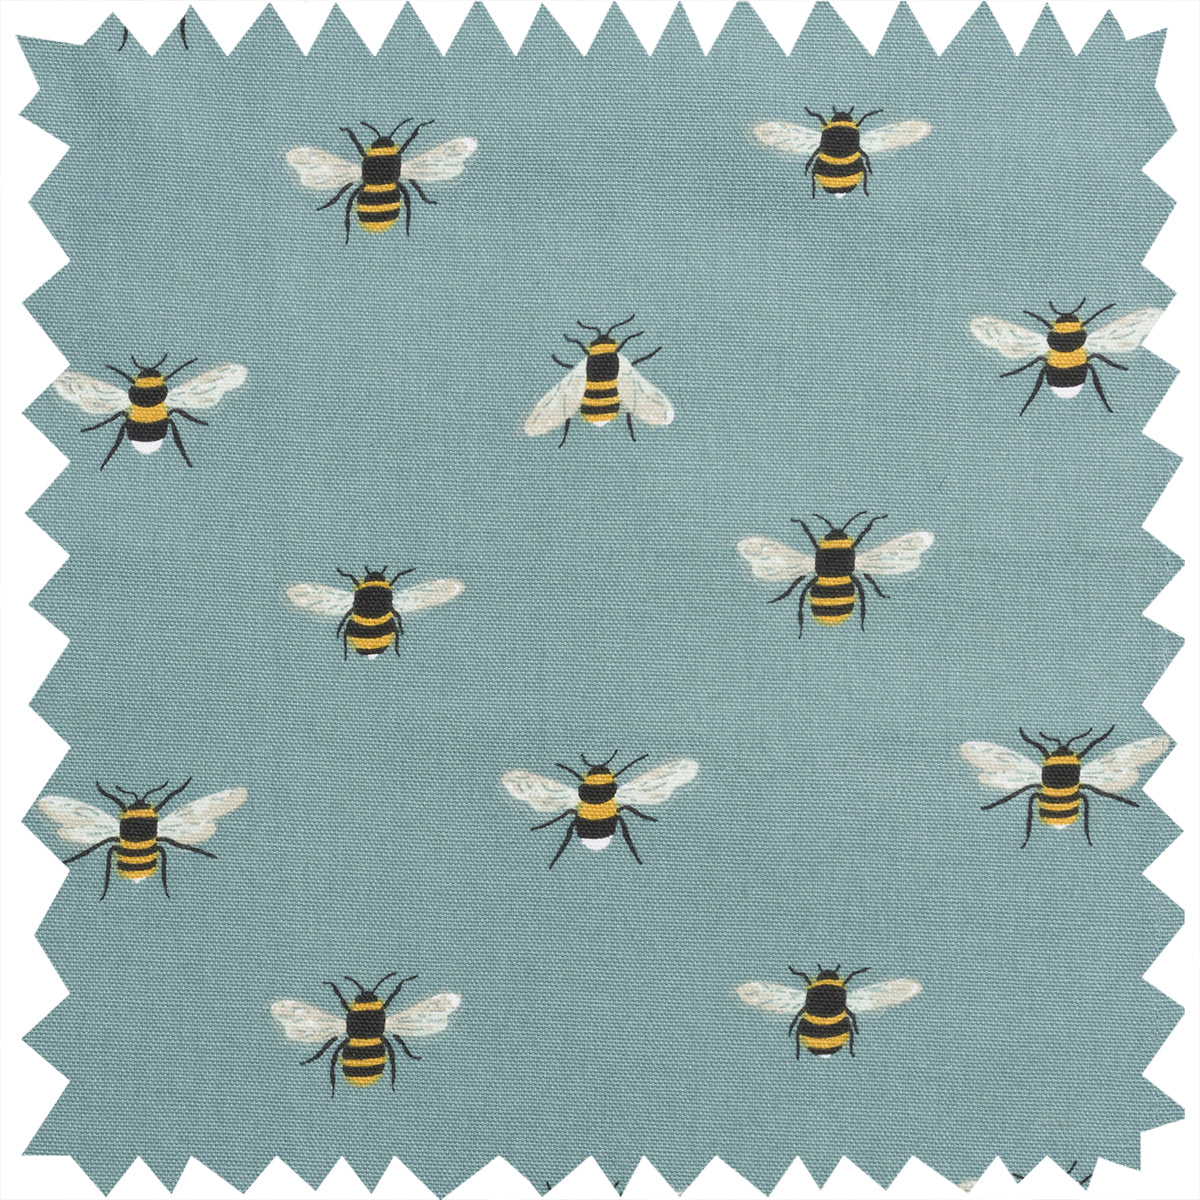 Bees Teal Fabric Sample by Sophie Allport